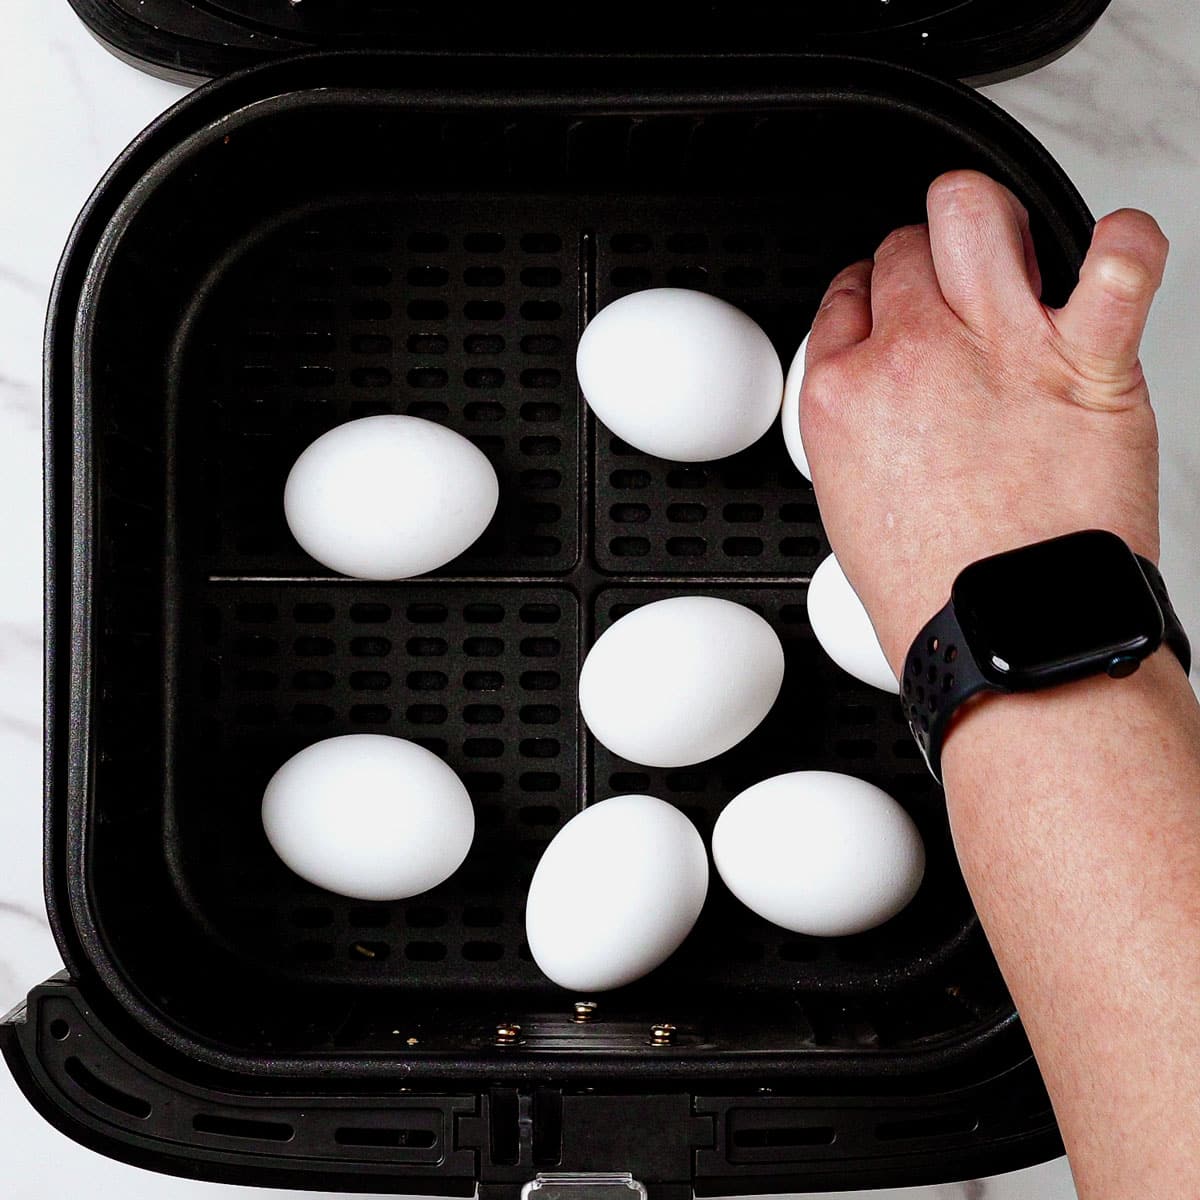 Adding eggs to air fryer